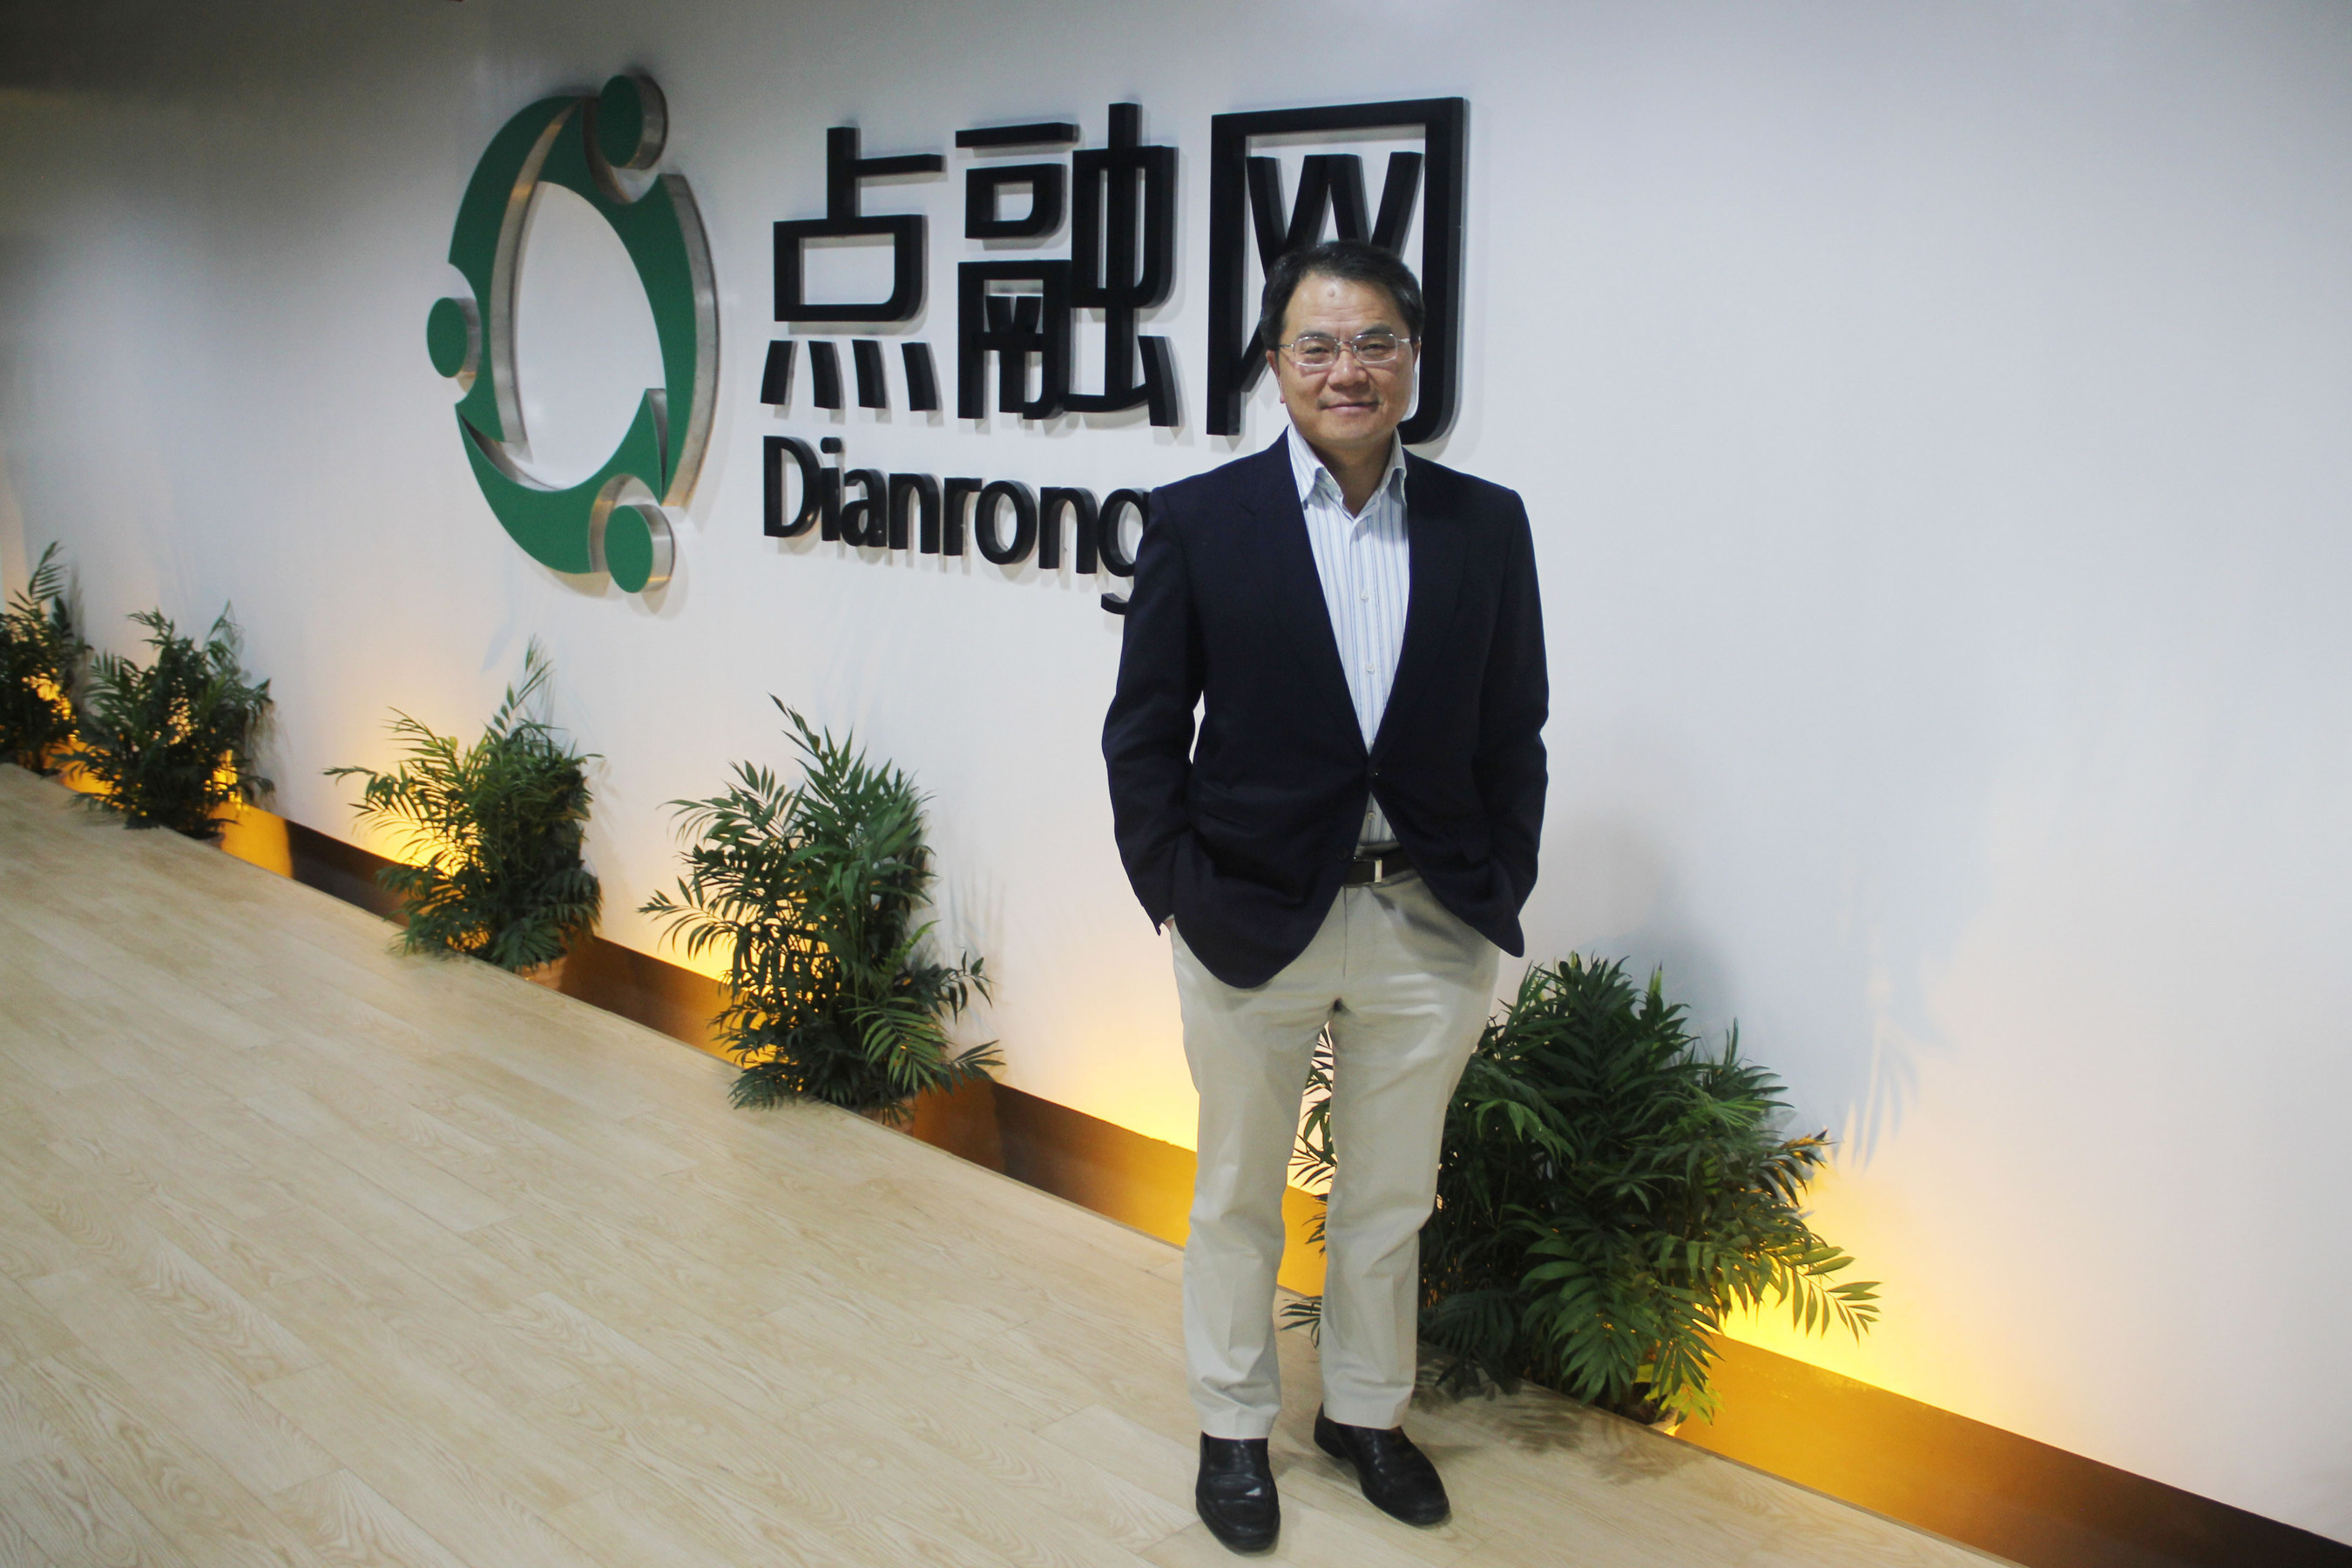 "Father of China Stock" Francis Leung Joins Dianrong.com Board